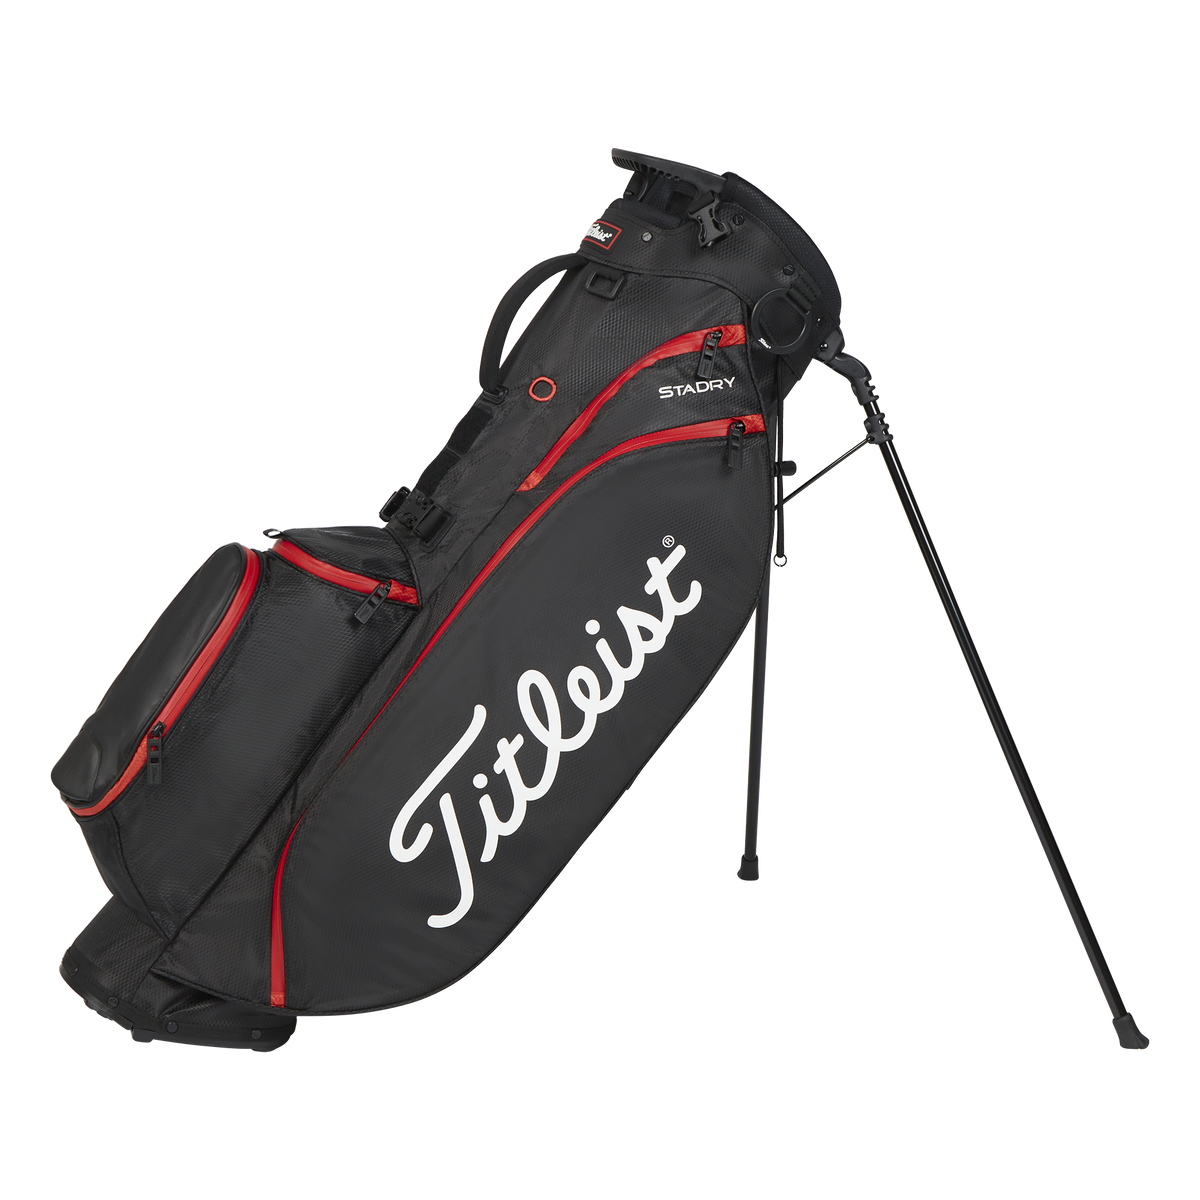 Titleist Players 4 Golf Stand Bag Review - The Left Rough